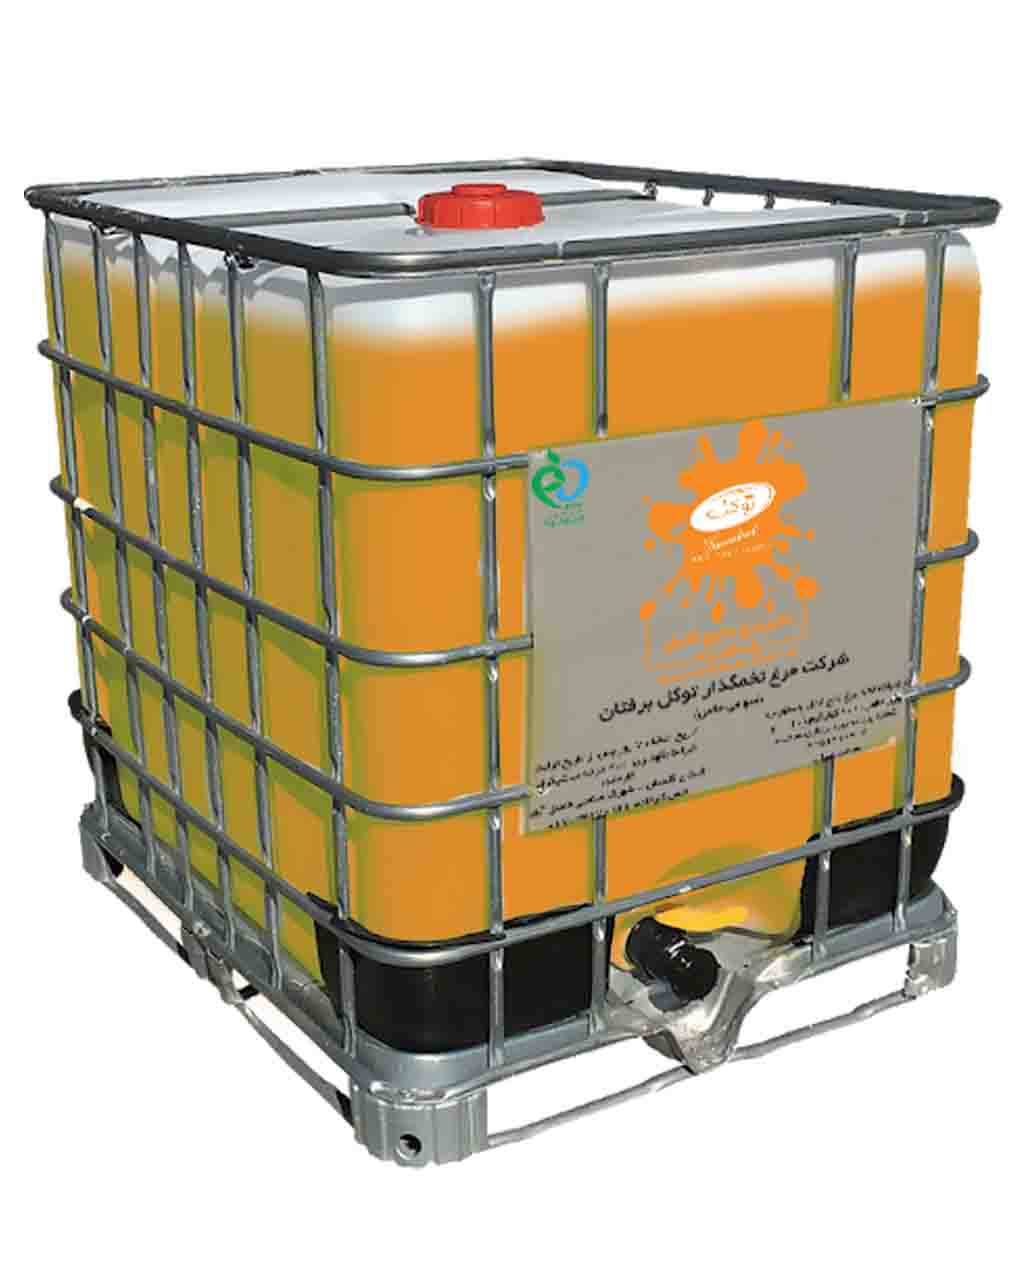 Whole eggs (mixed), pasteurized and homogenized liquid, 900 kg